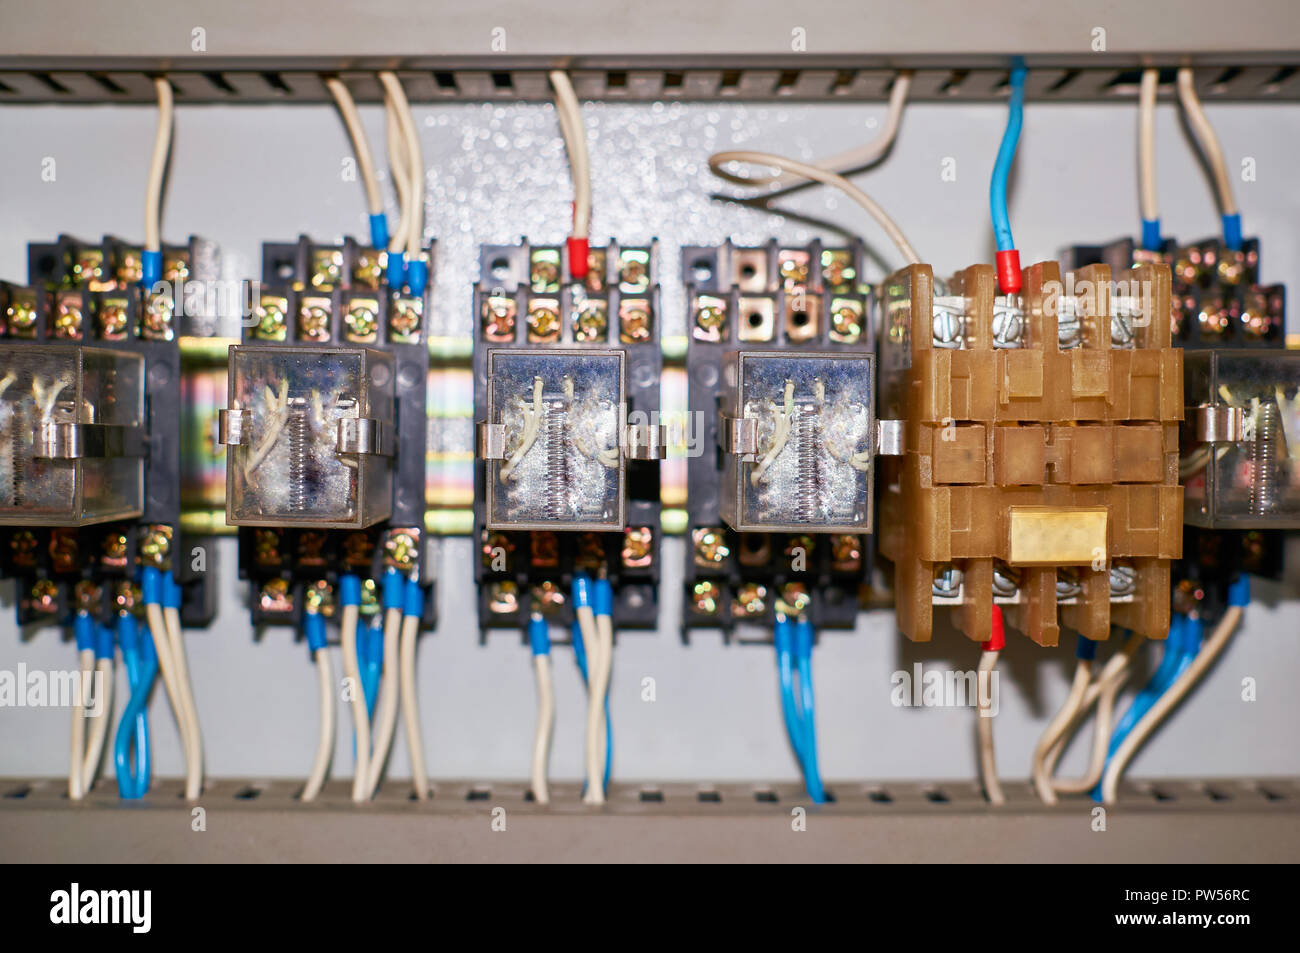 Several old relays with connected colored wires. Industrial background. Stock Photo